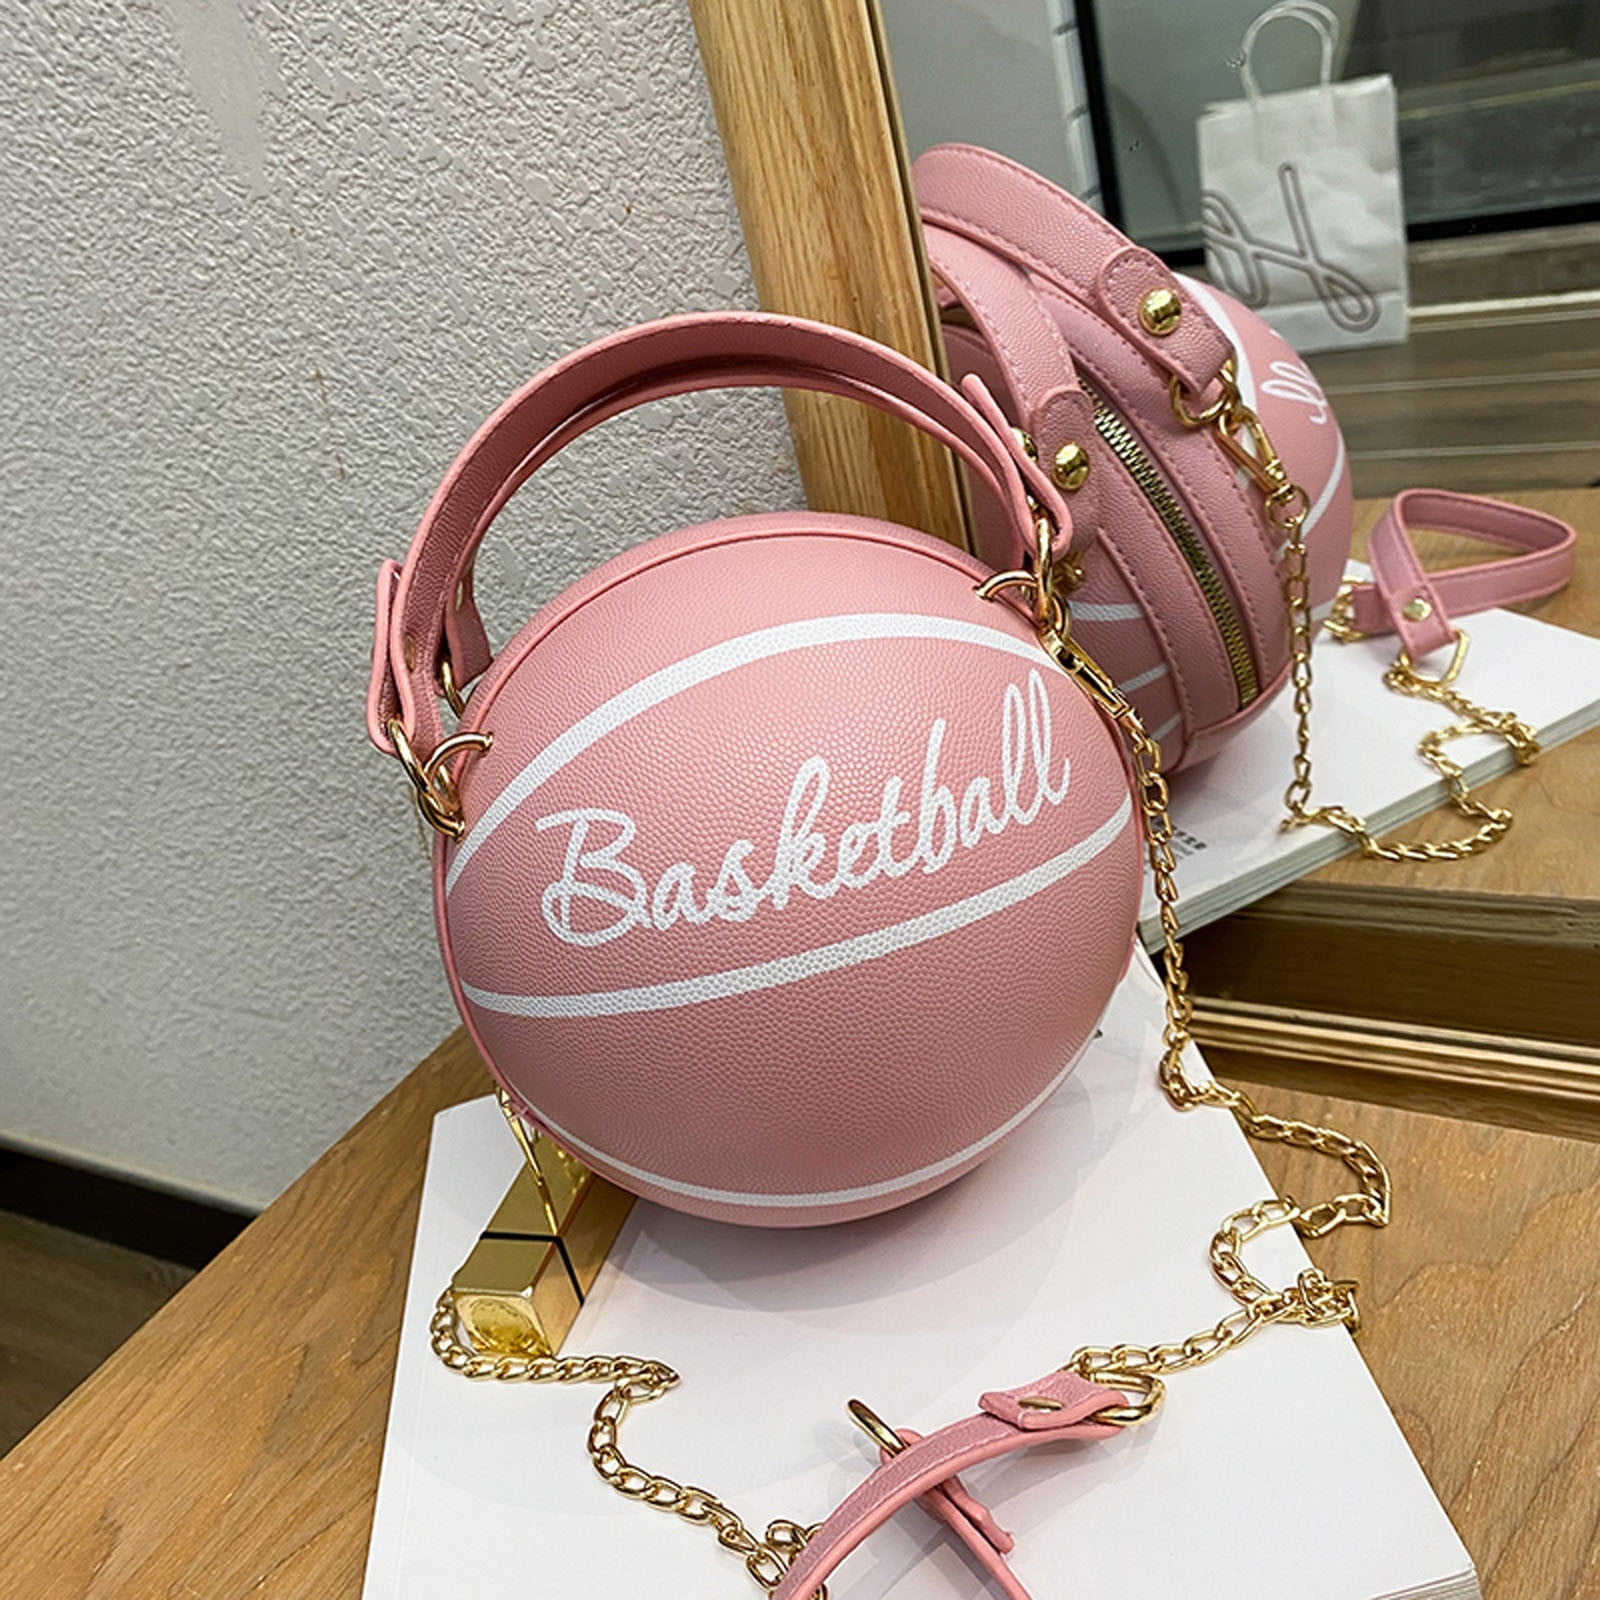 CHGBMOK Bags for Women Personalized Round Ball Bag Chain Basketball Bag All Match Satchel Small Bag 2b22054d 79a1 44f6 b3c1 743372fa09a0.a0d526fa5c0a503dd2d6ba165ae0221e